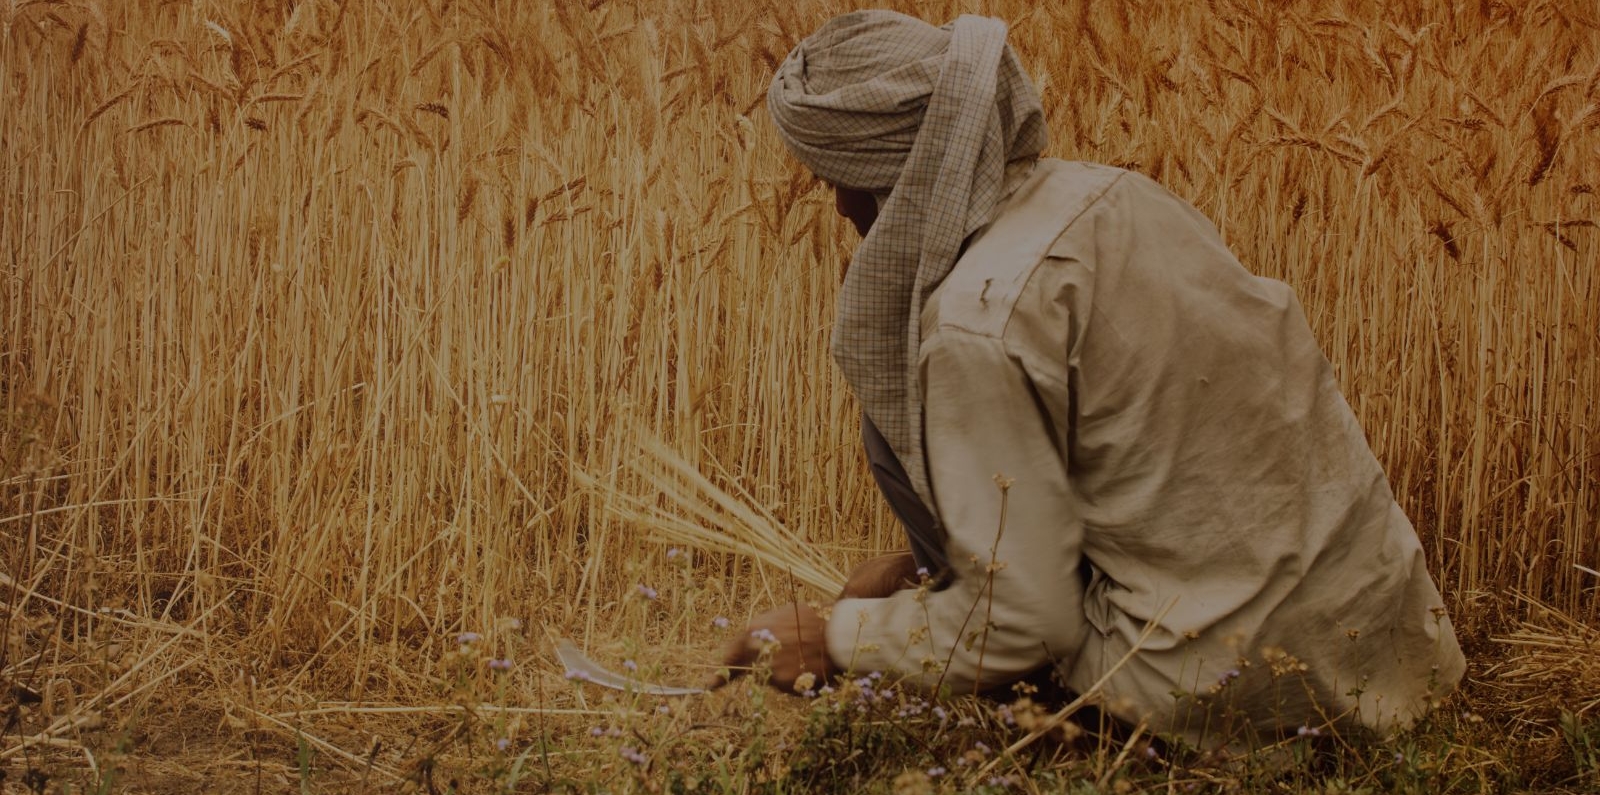  farmer harvesting wheat in a field surrounded by tall golden crops